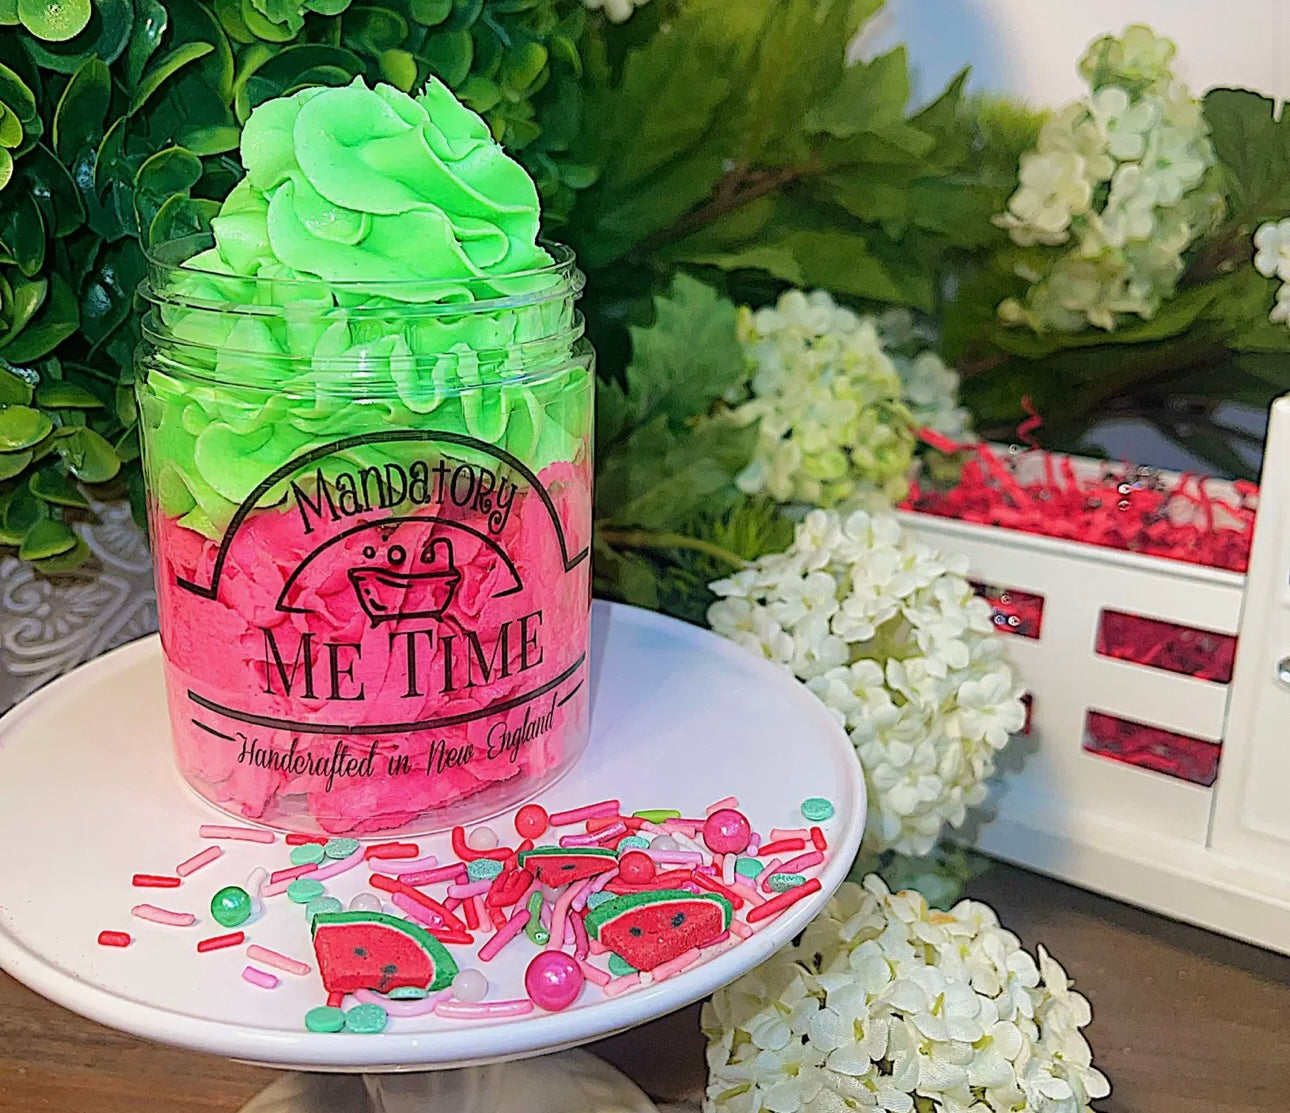 Watermelon Whipped Body Butter